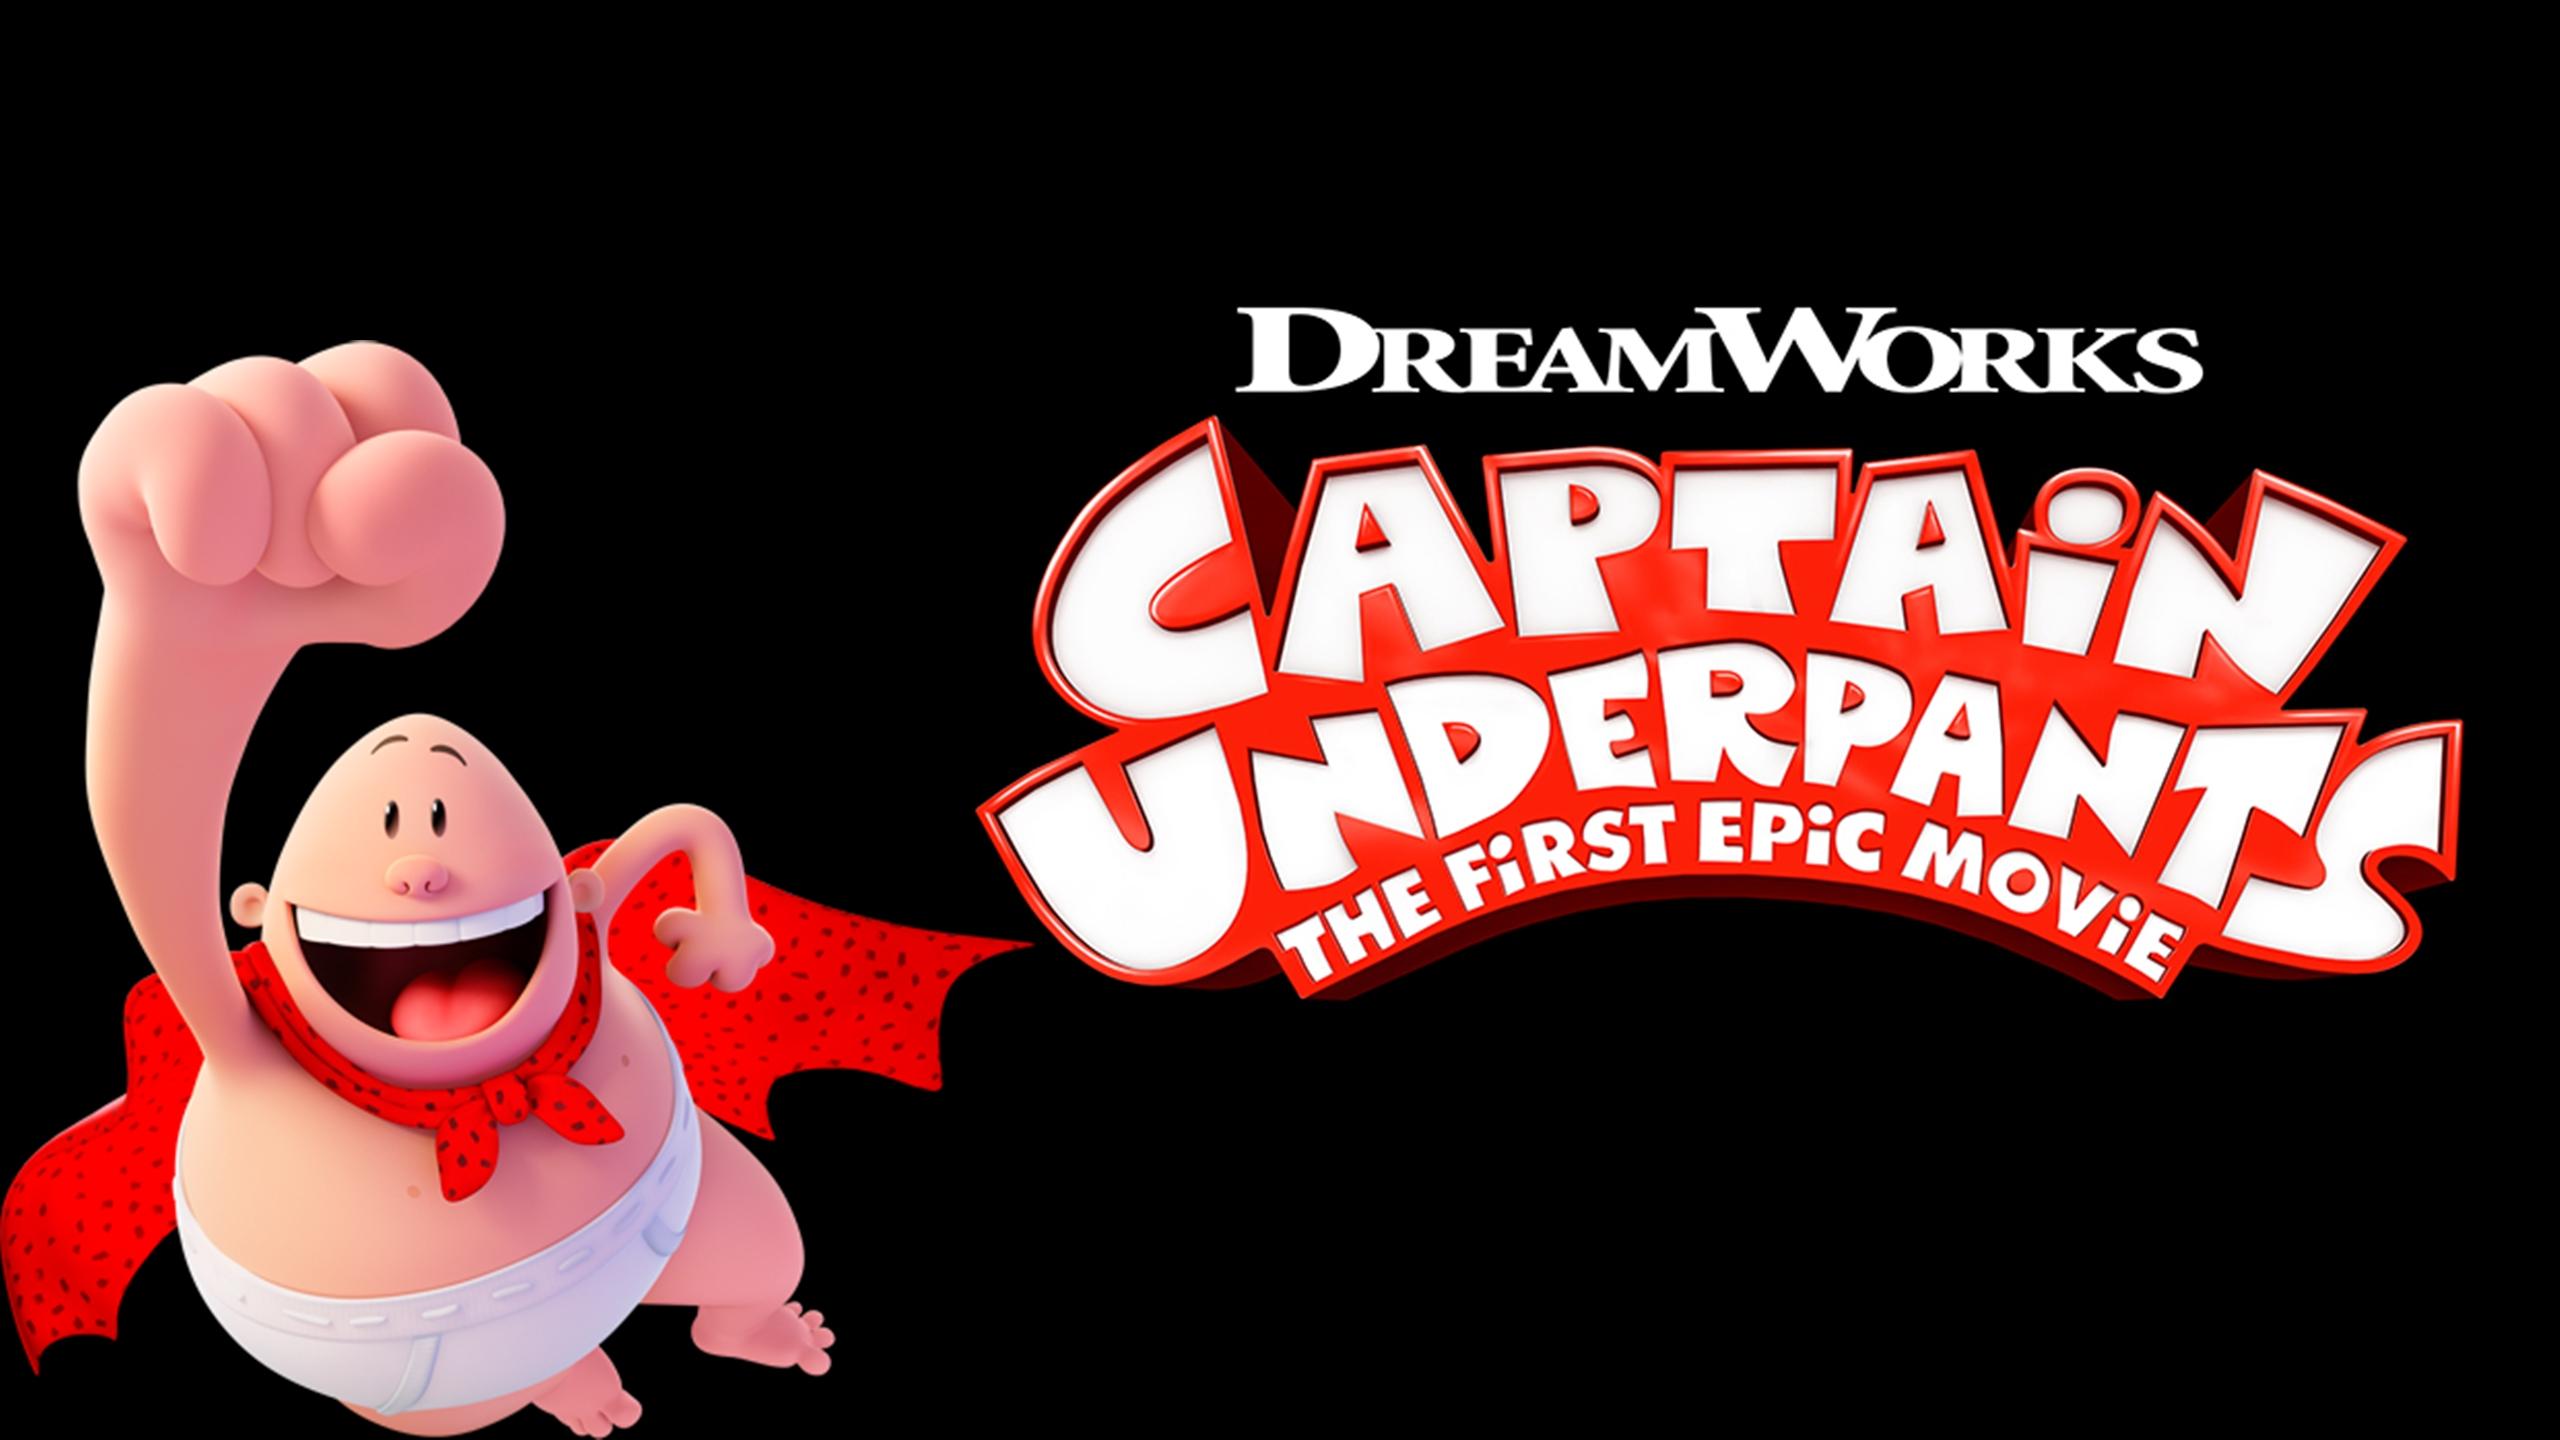 Captain Underpants The First Epic Movie (2017) 2 Wallpaper